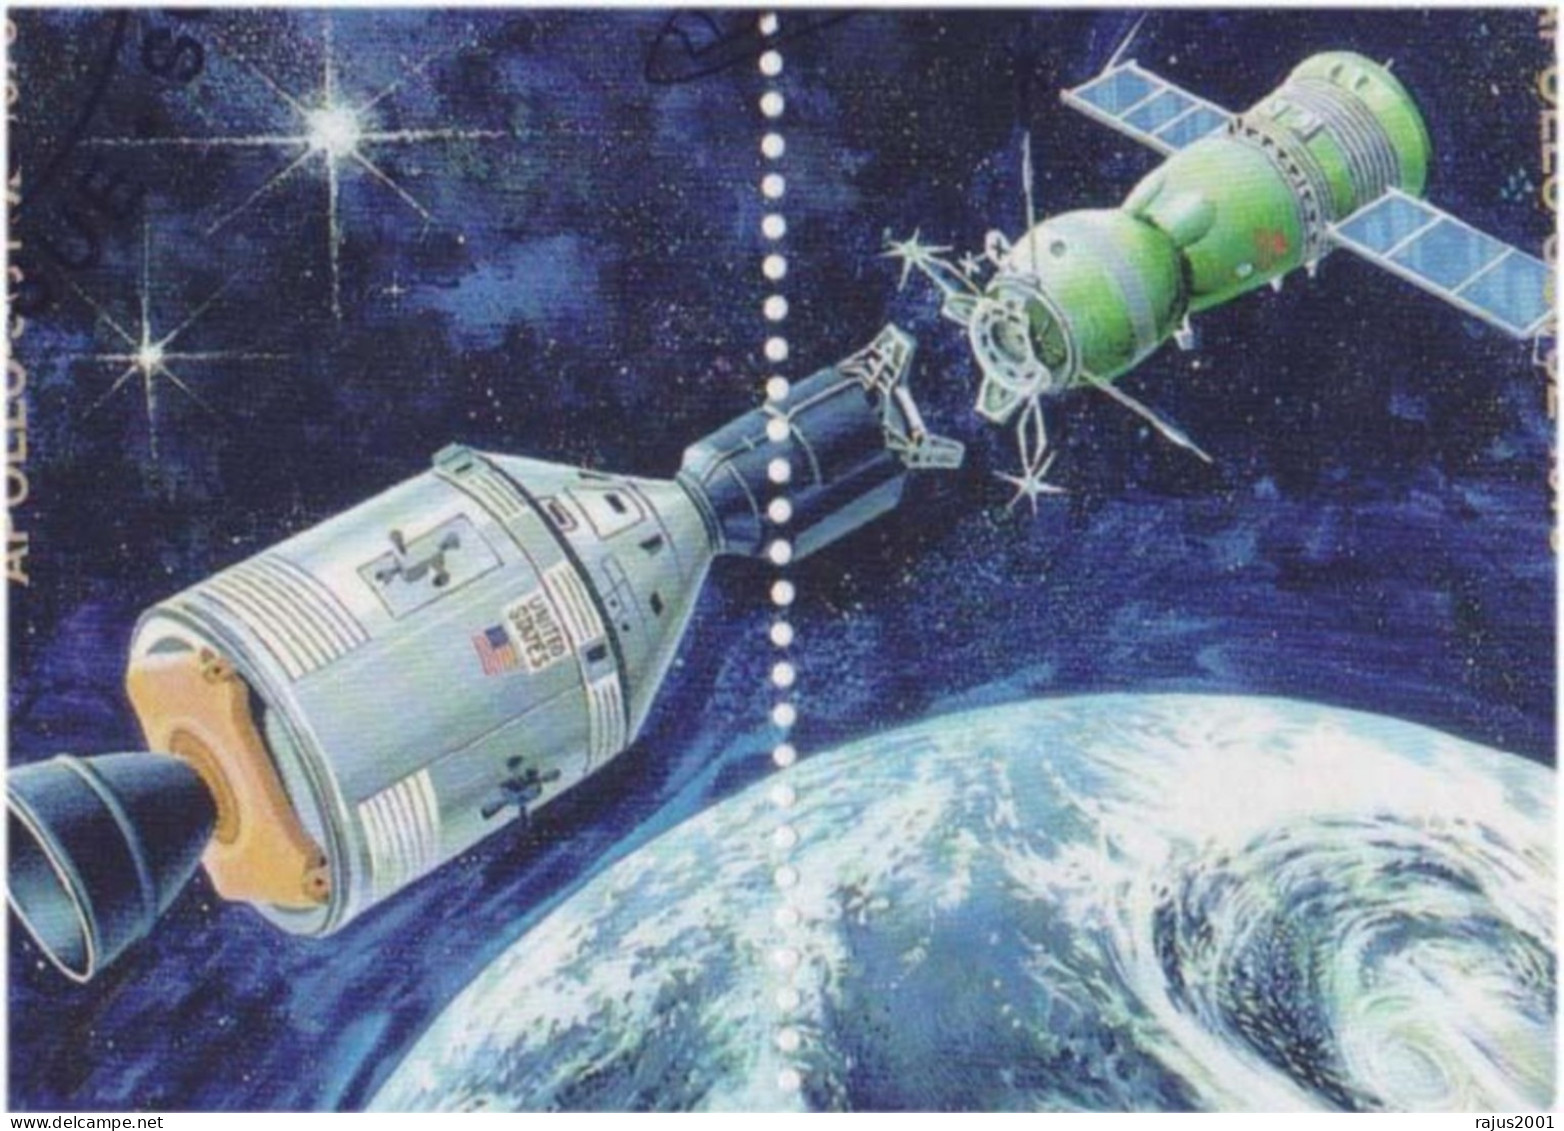 MIR Shuttle APOLLO-SOYUZ Link Up, First Joint Space Flight Between US And USSR, Earth, Planet, Astronomy, Marshall FDC - Astronomùia